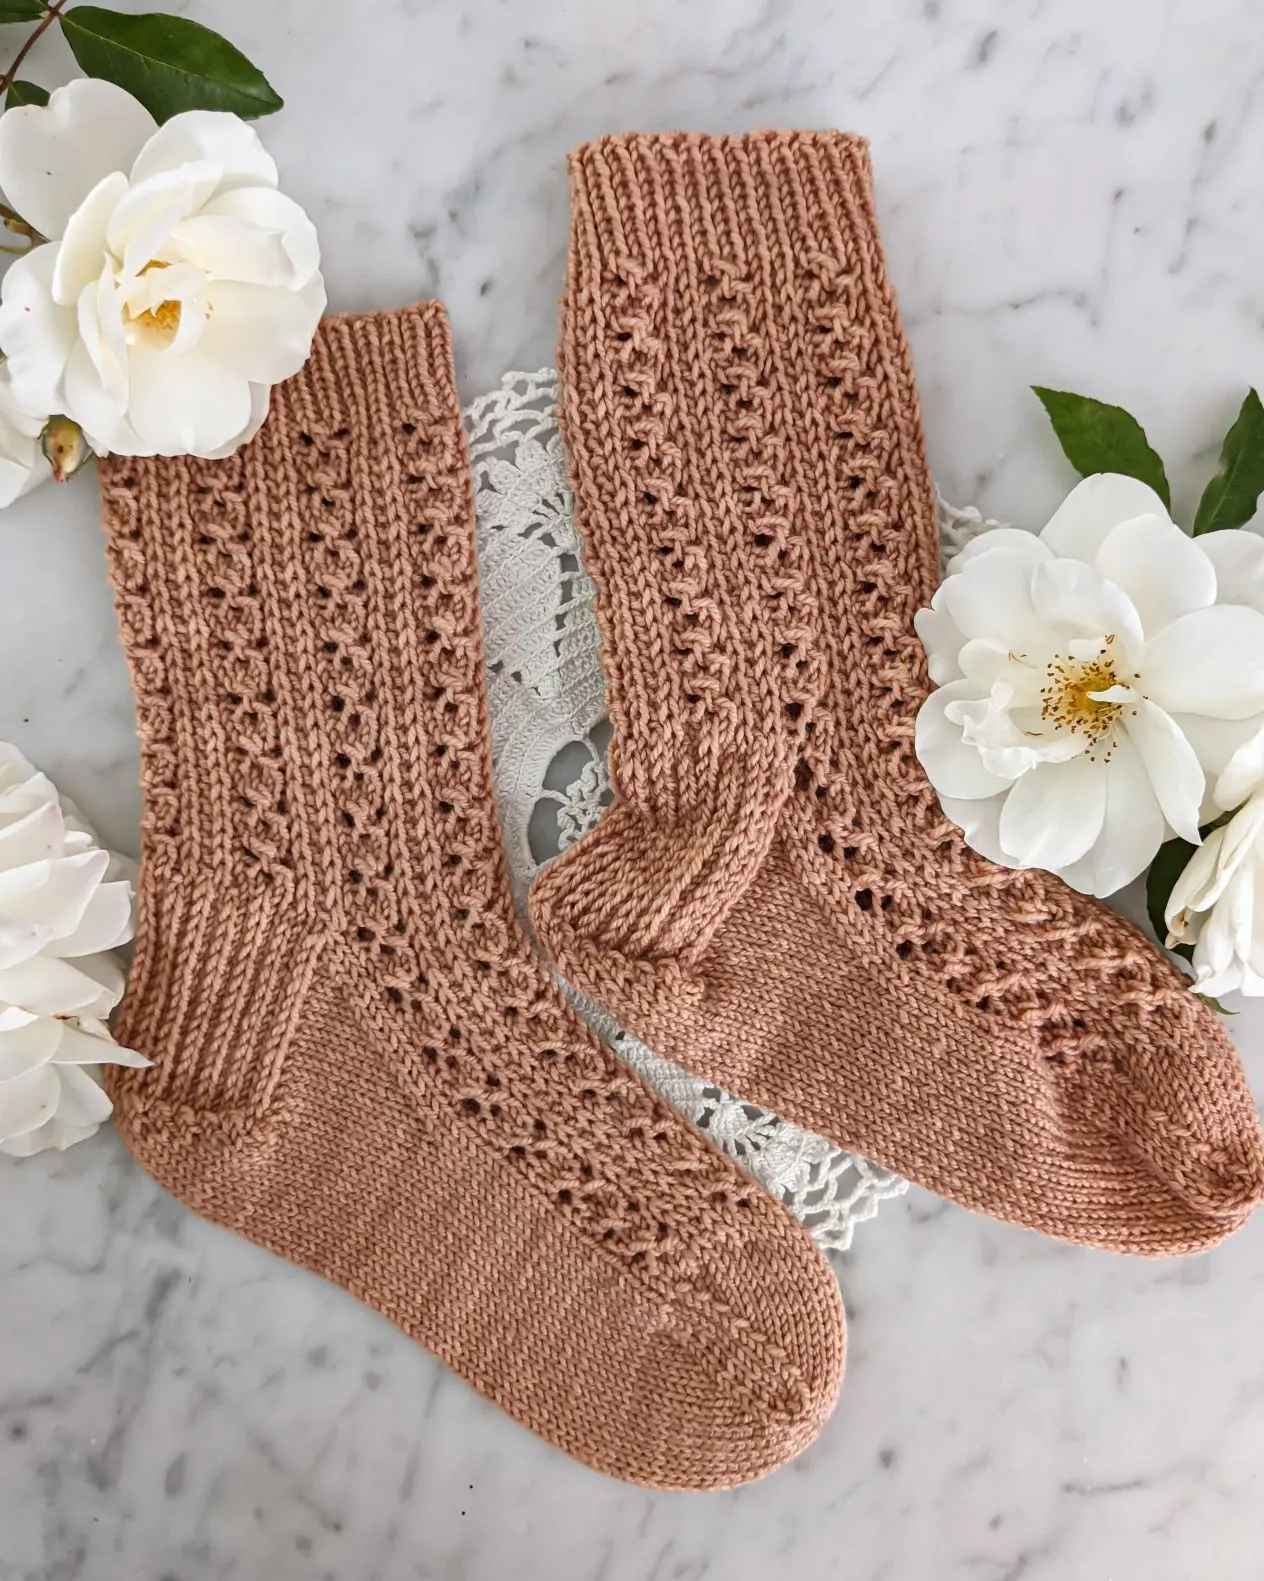 A pair of handknit socks laid flat on a white marble countertrop. One has been blocked and sits smoothly on the surface. The other hasn't been blocked and is extremely lumpy.